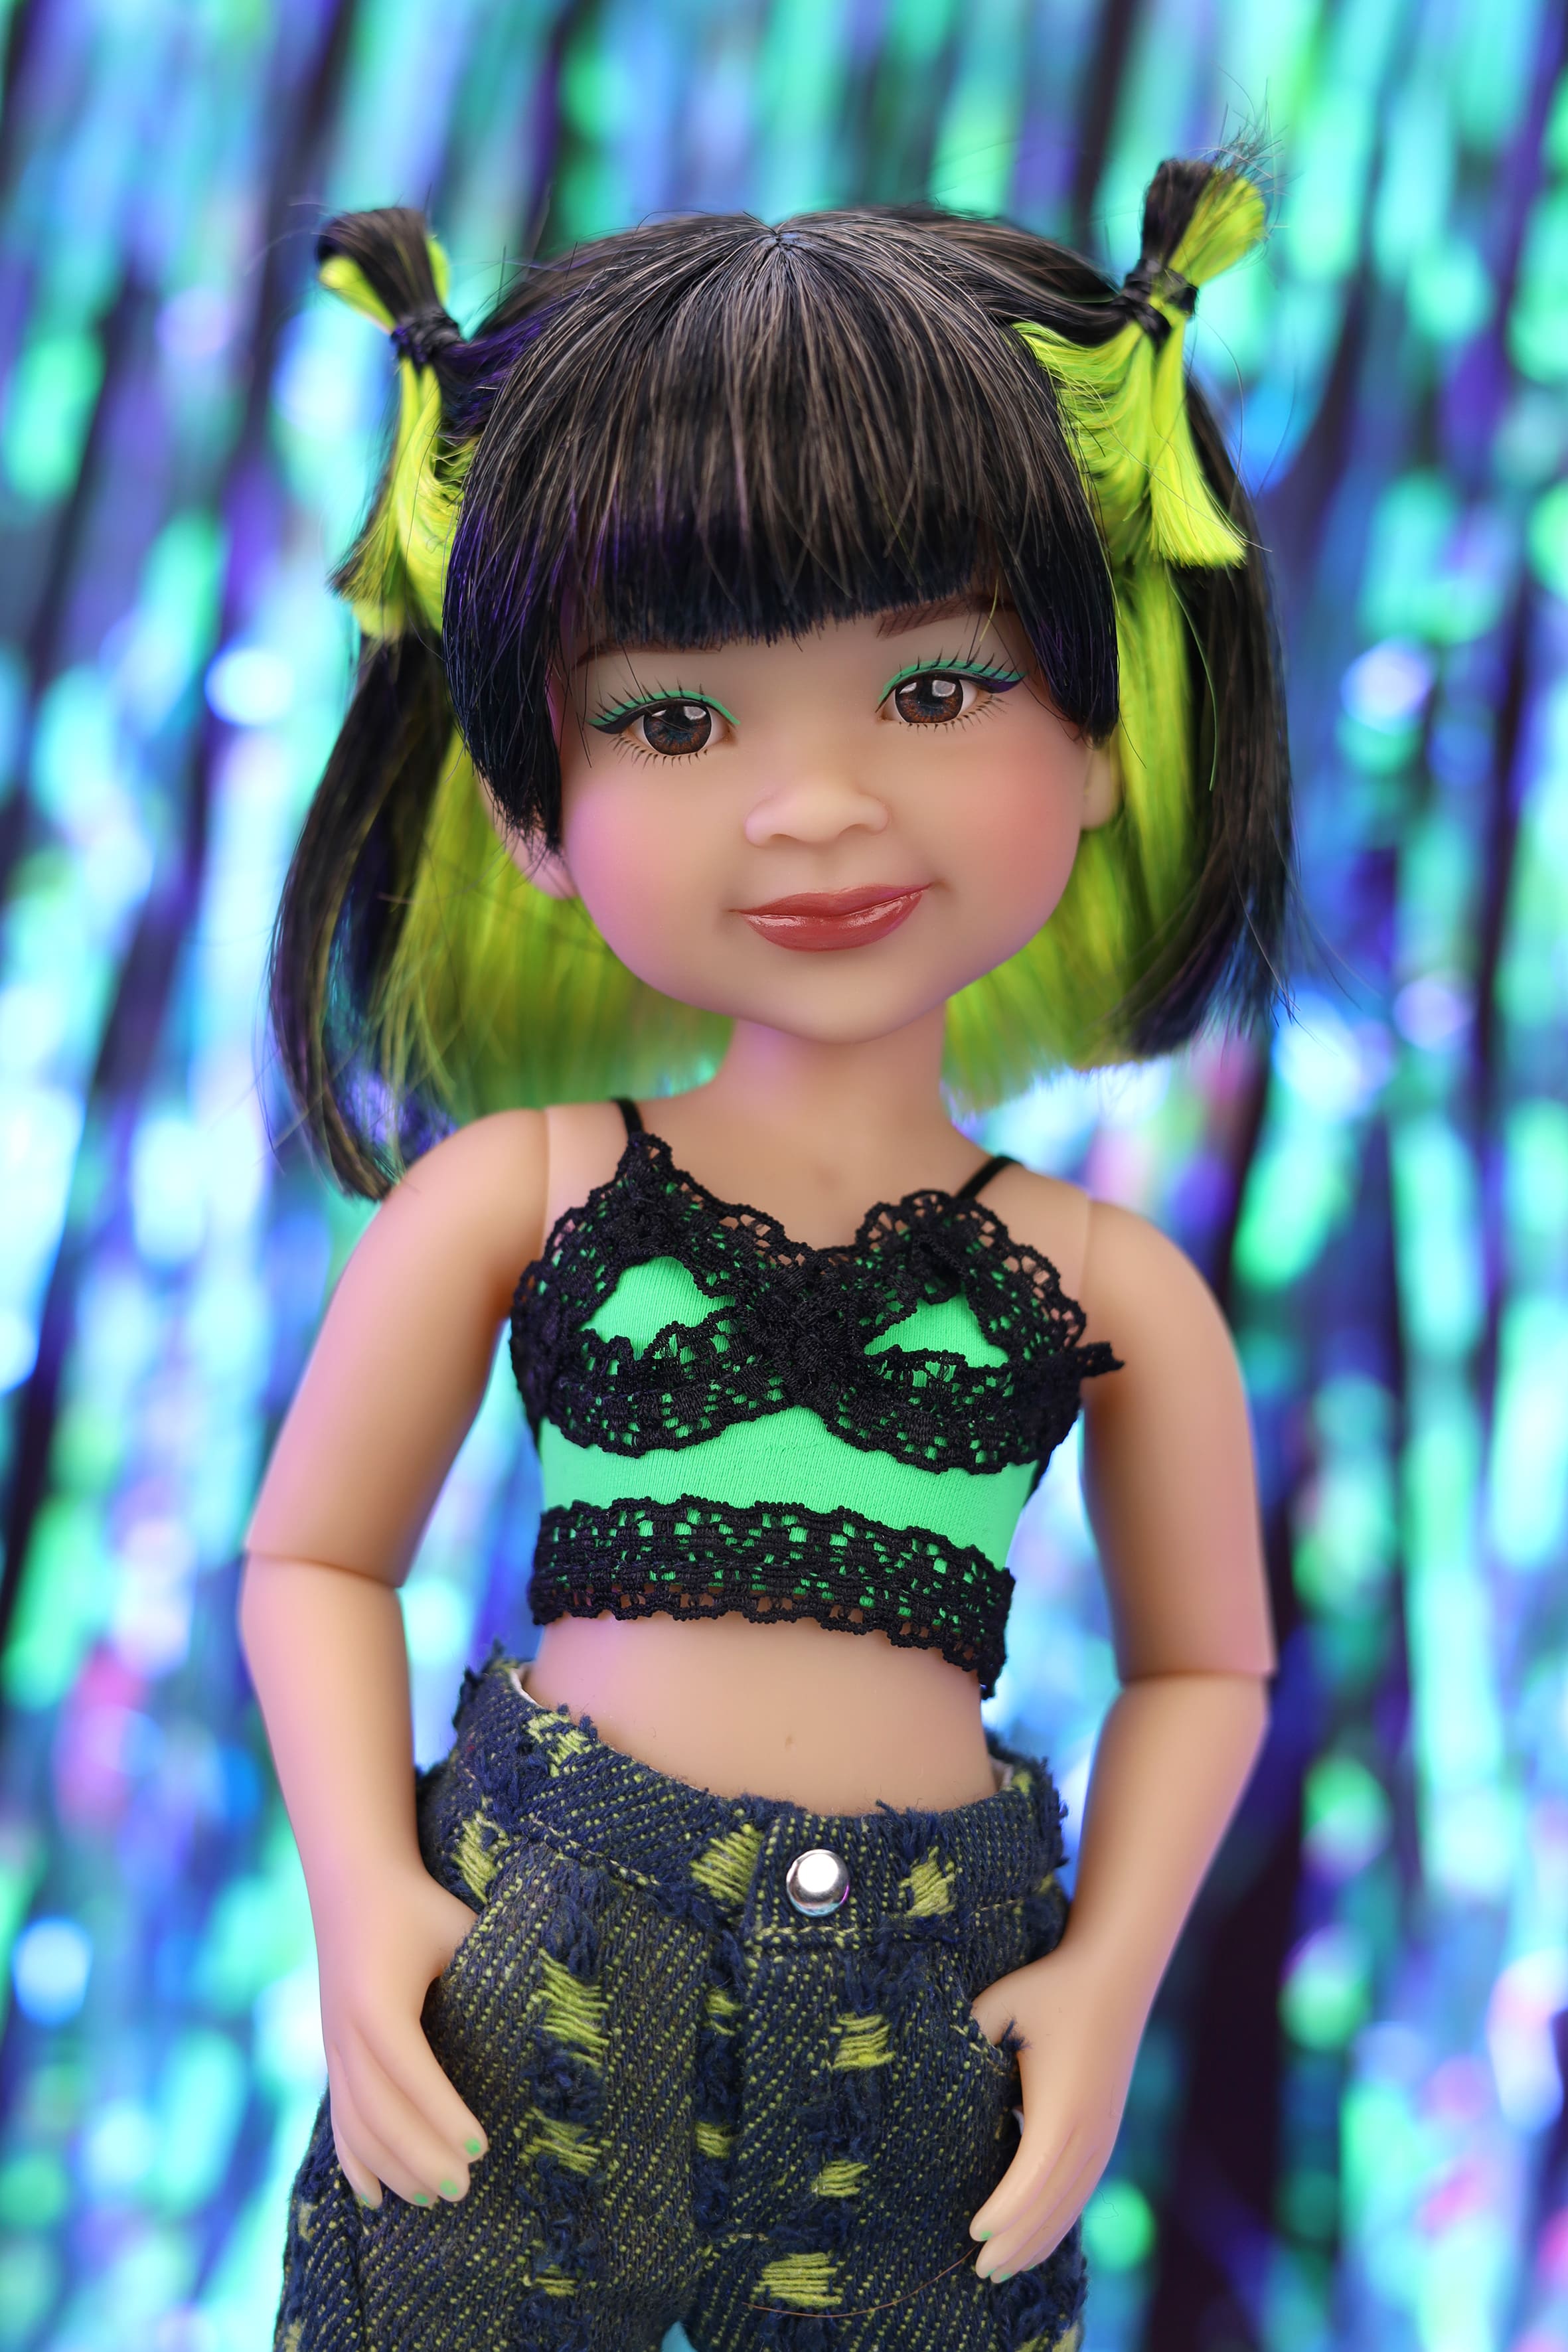 Back to the future: Meet Our Ruby Red Siblies Y2K-inspired Dolls